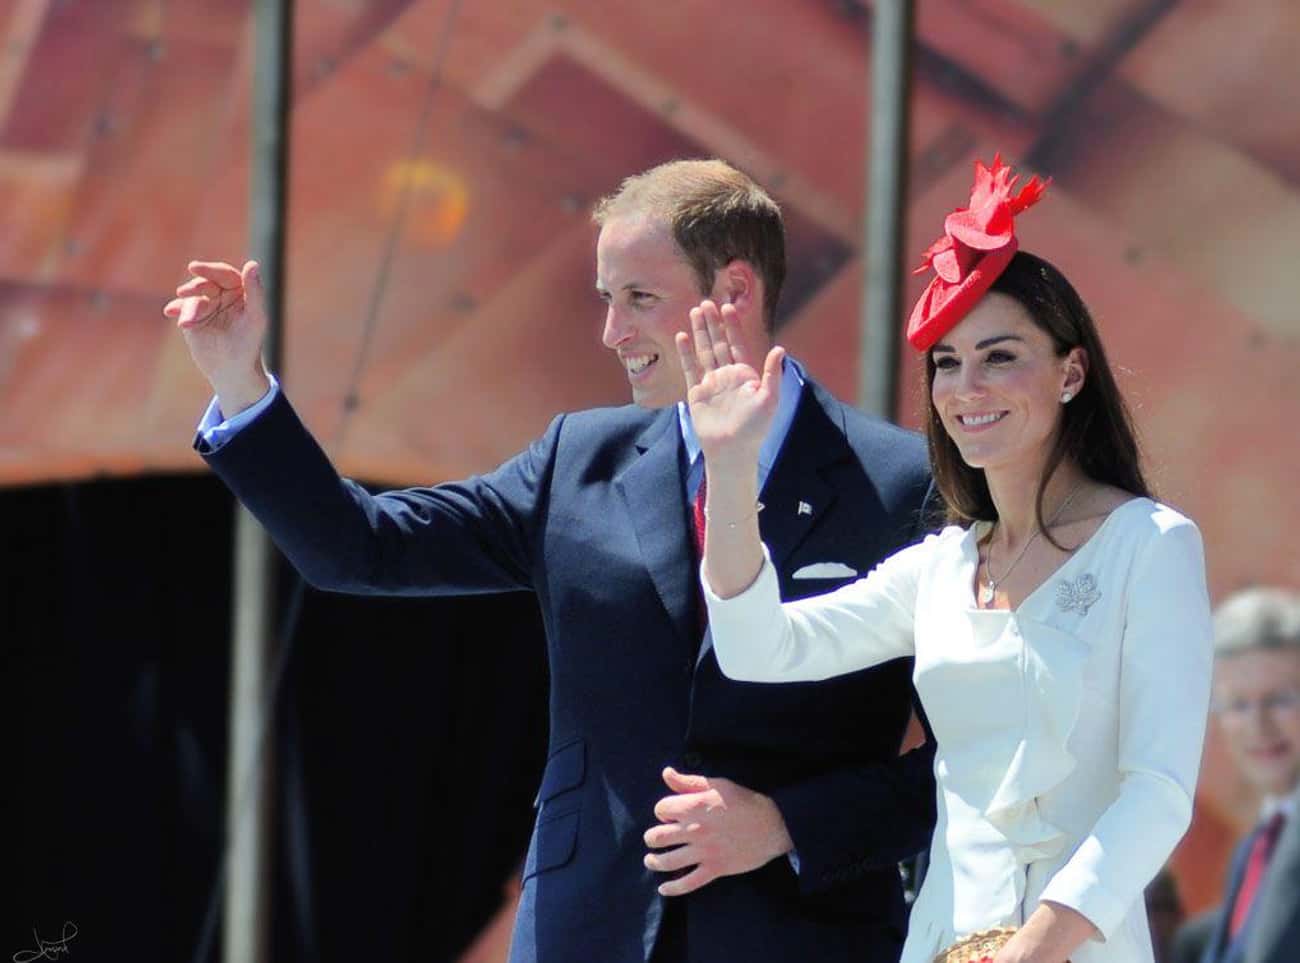 Prince William Married Kate Middleton